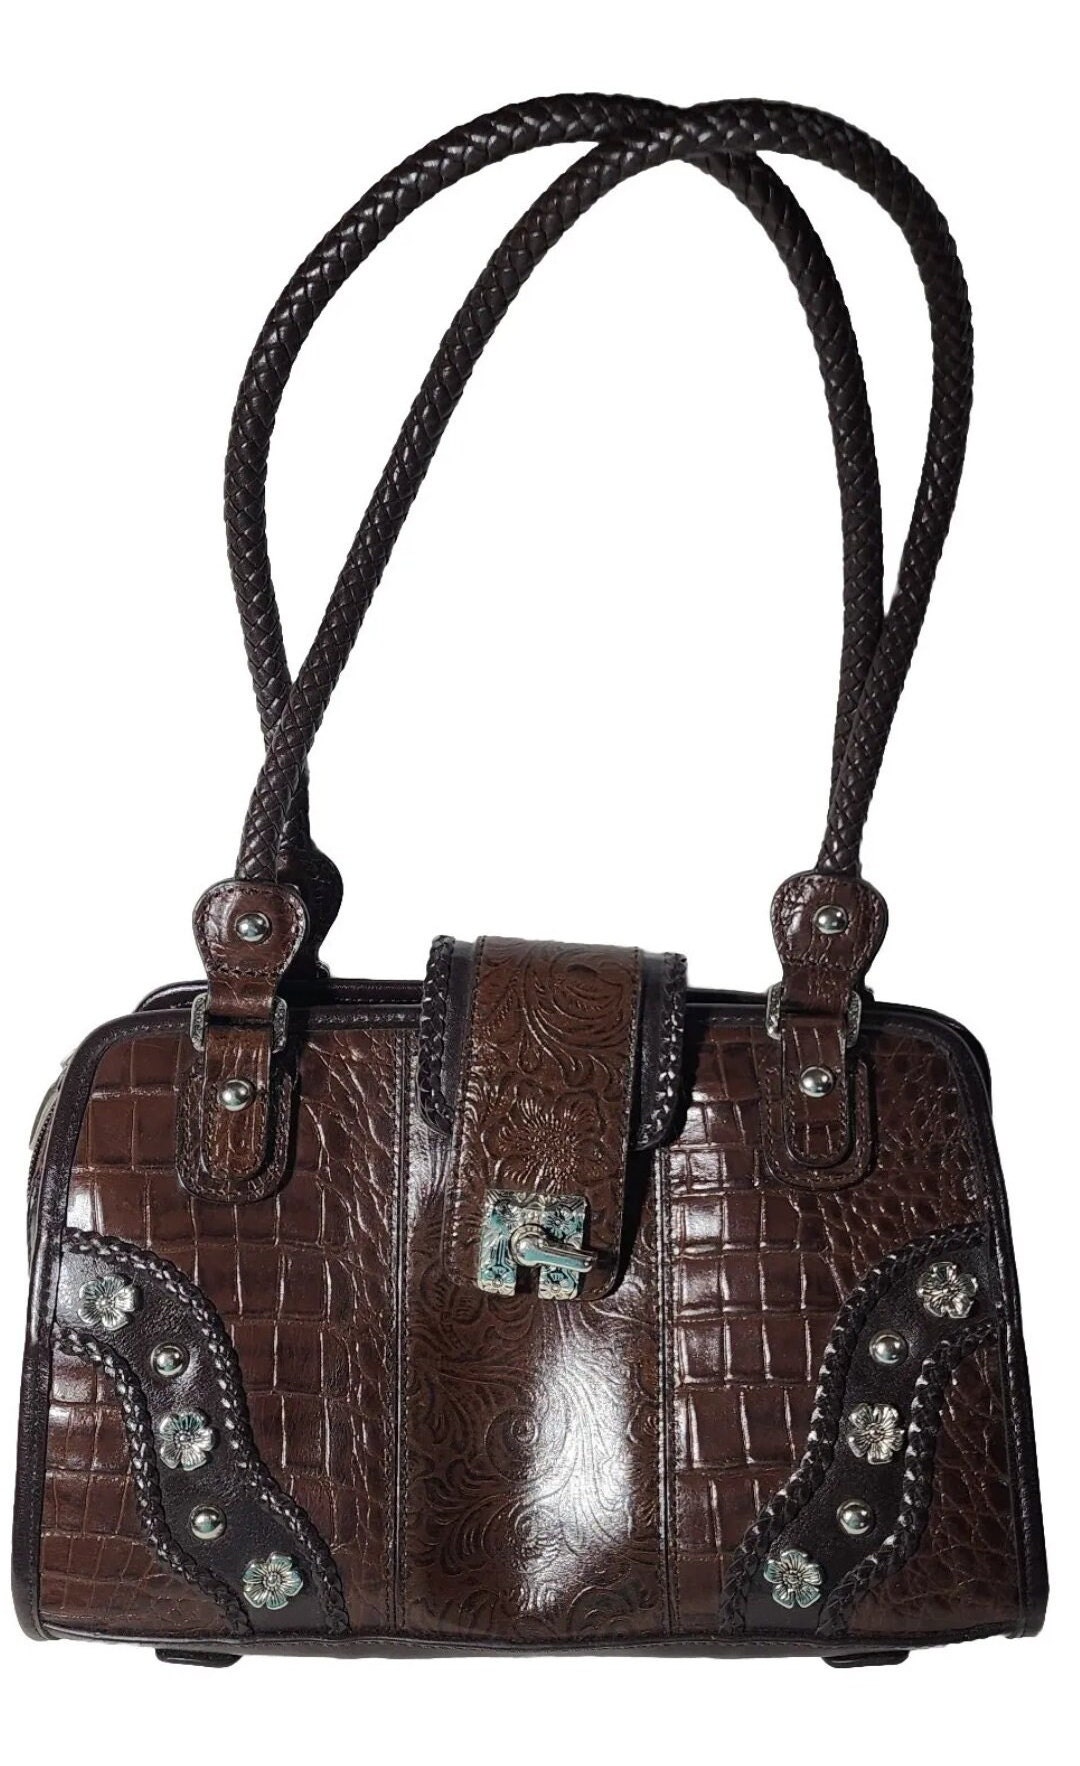 Great American Leatherworks Embossed Leather Purse | SCHEELS.com